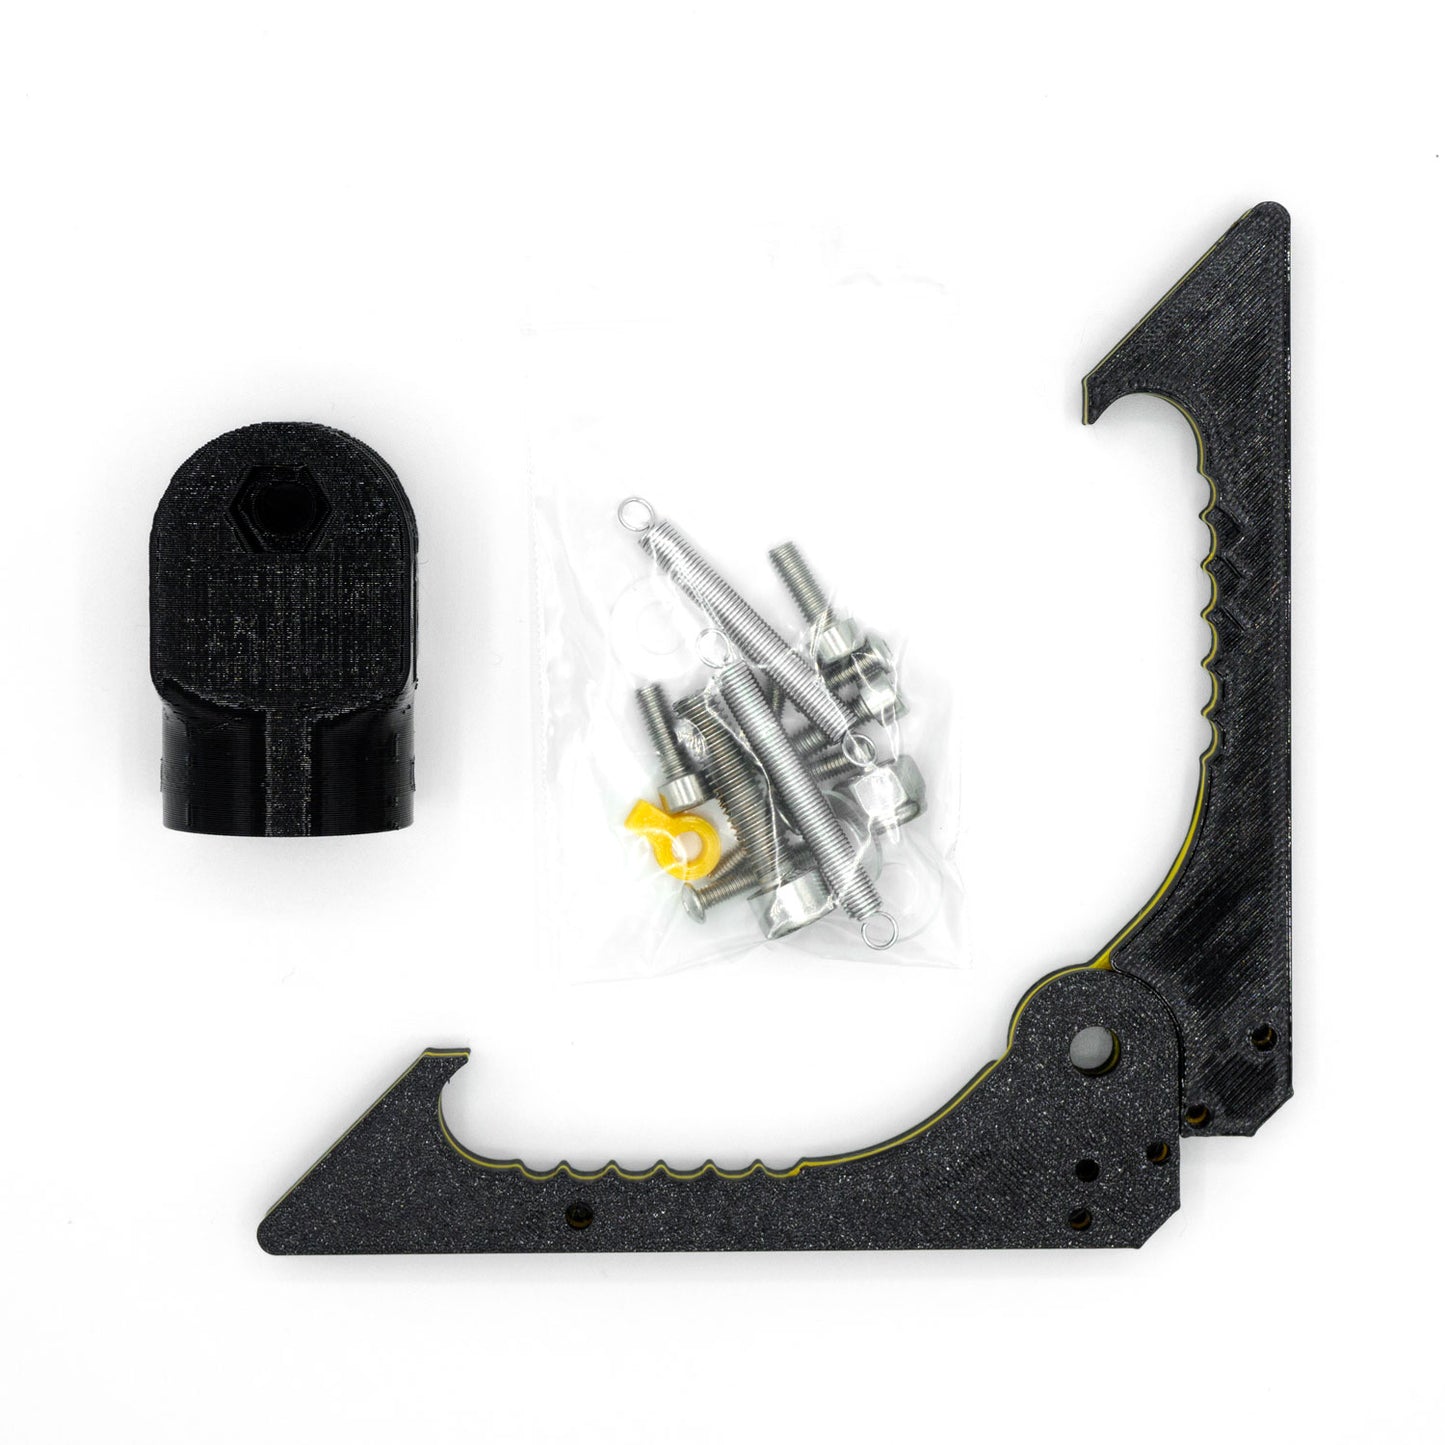 Spring loaded Claw- for Chasing Gladius Mini